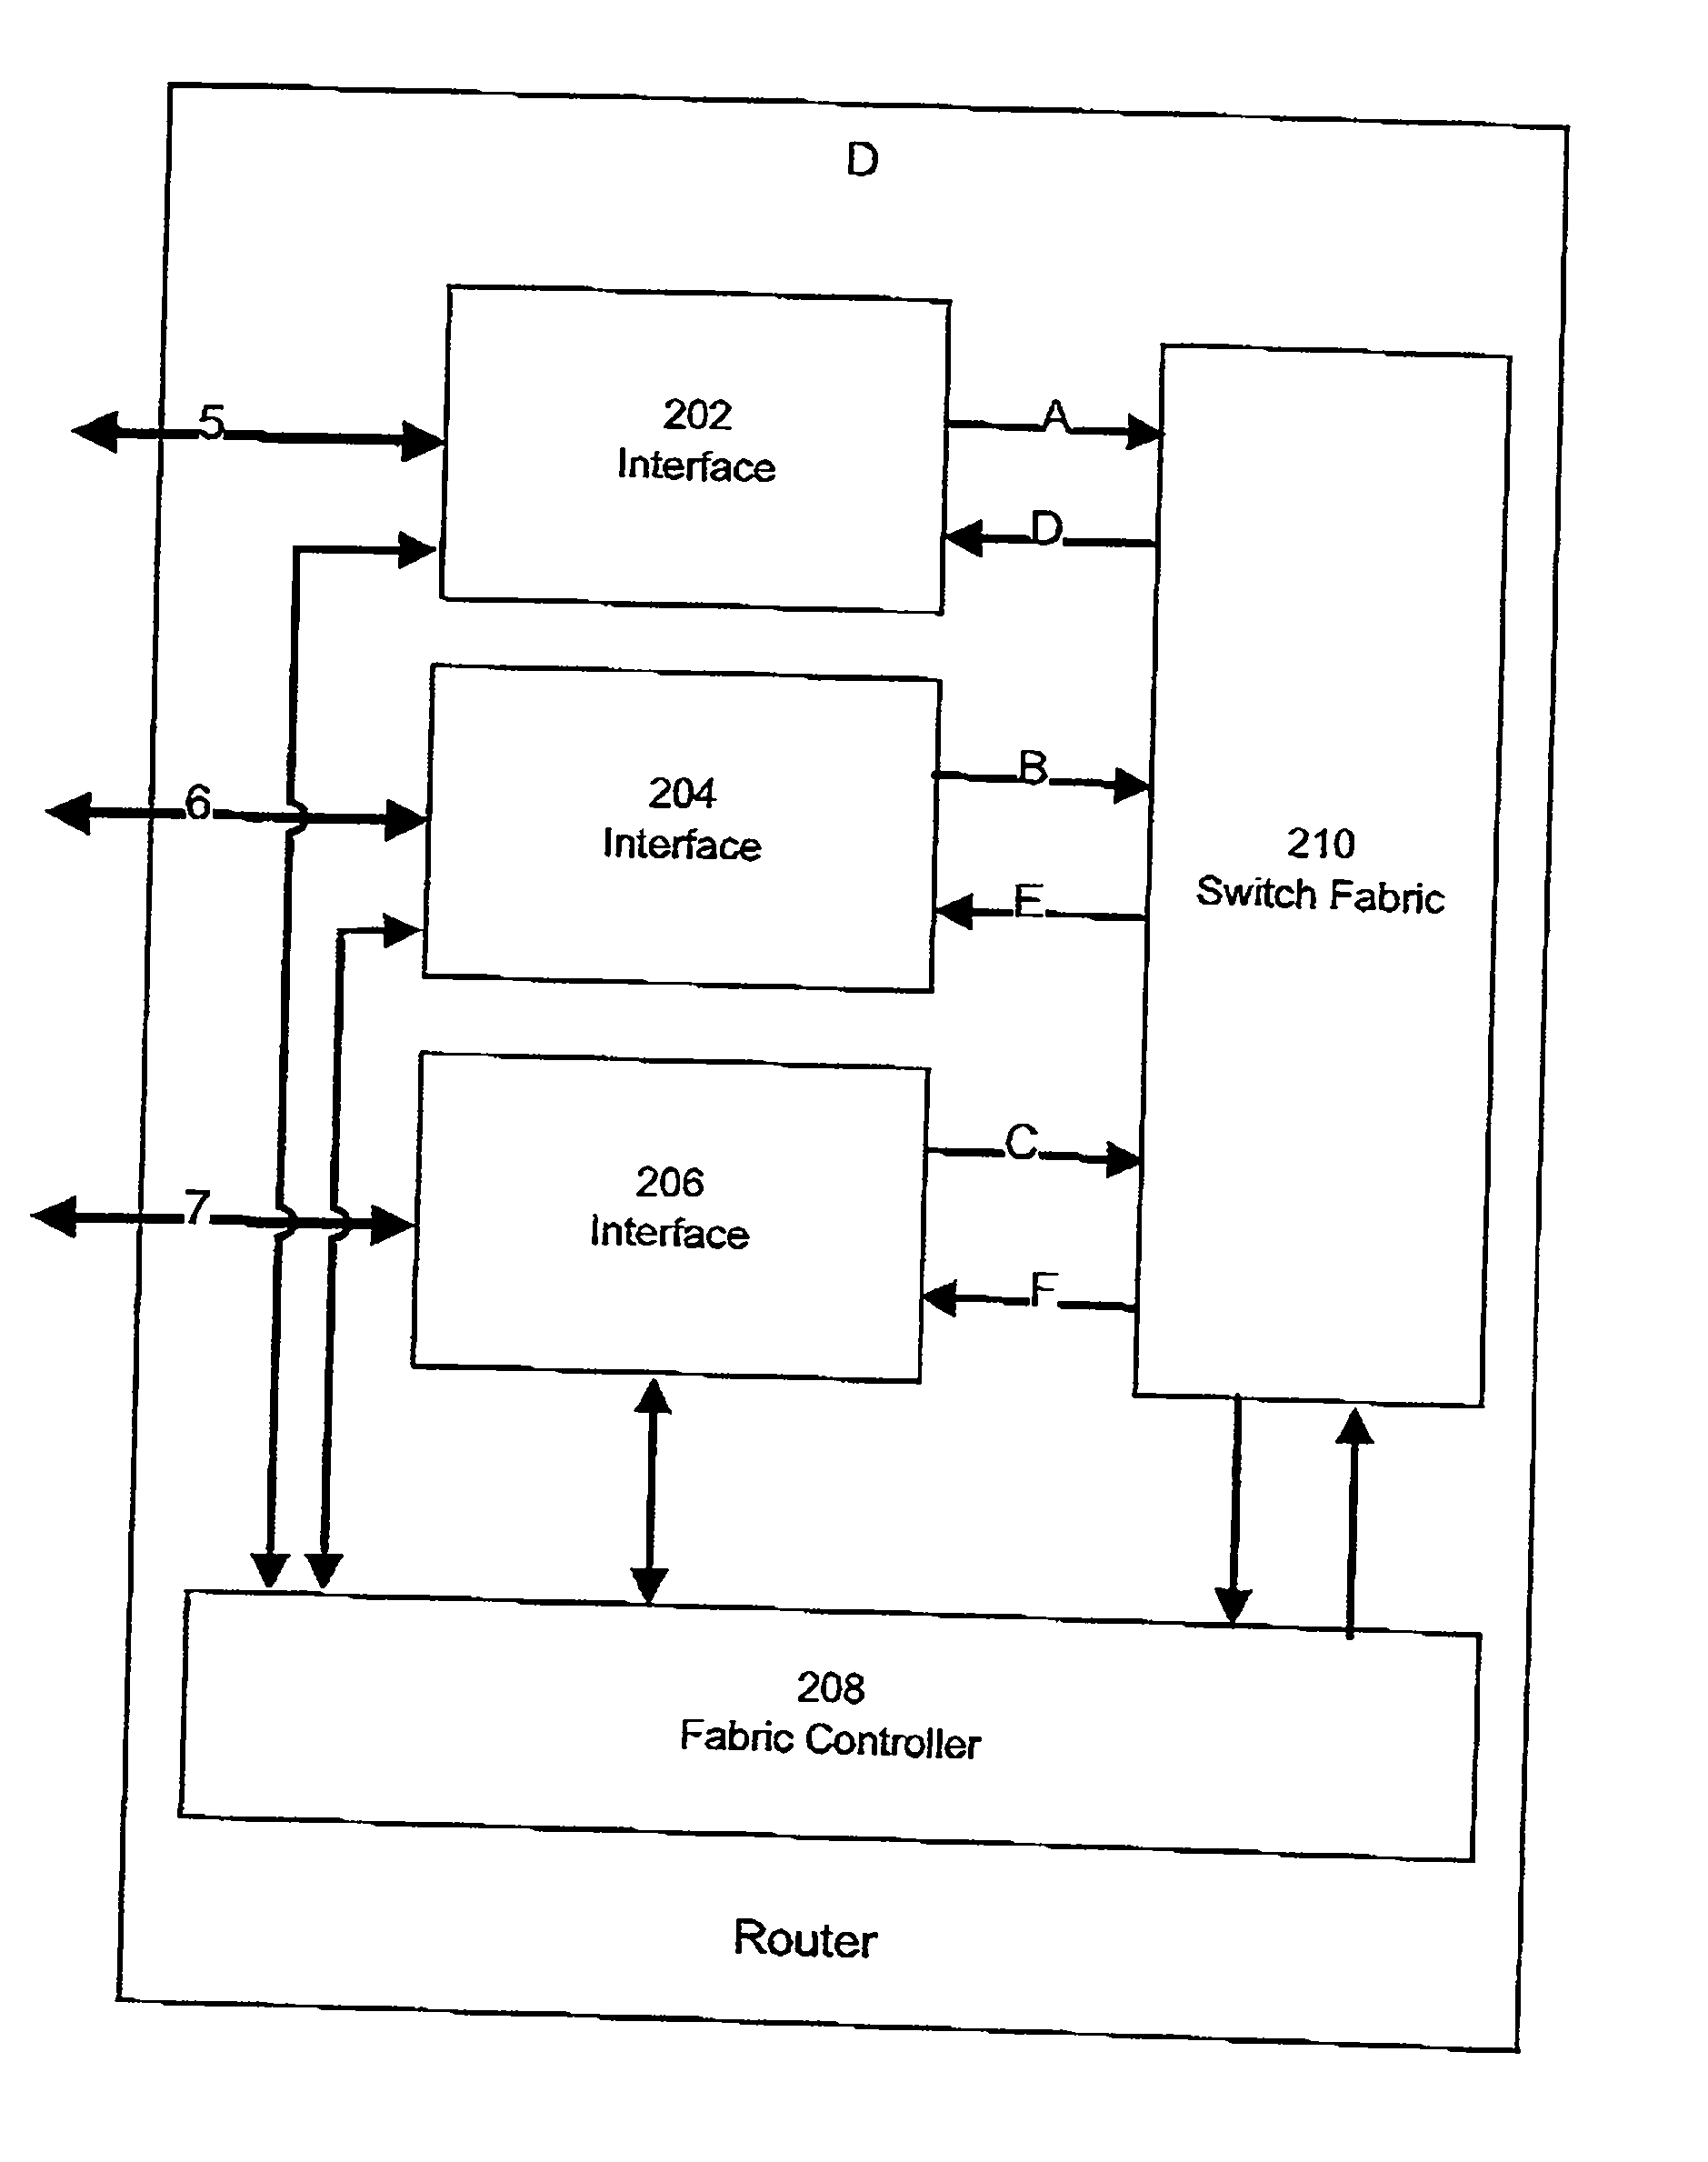 Method and apparatus for simple ip-layer bandwidth allocation using ingress control of egress bandwidth